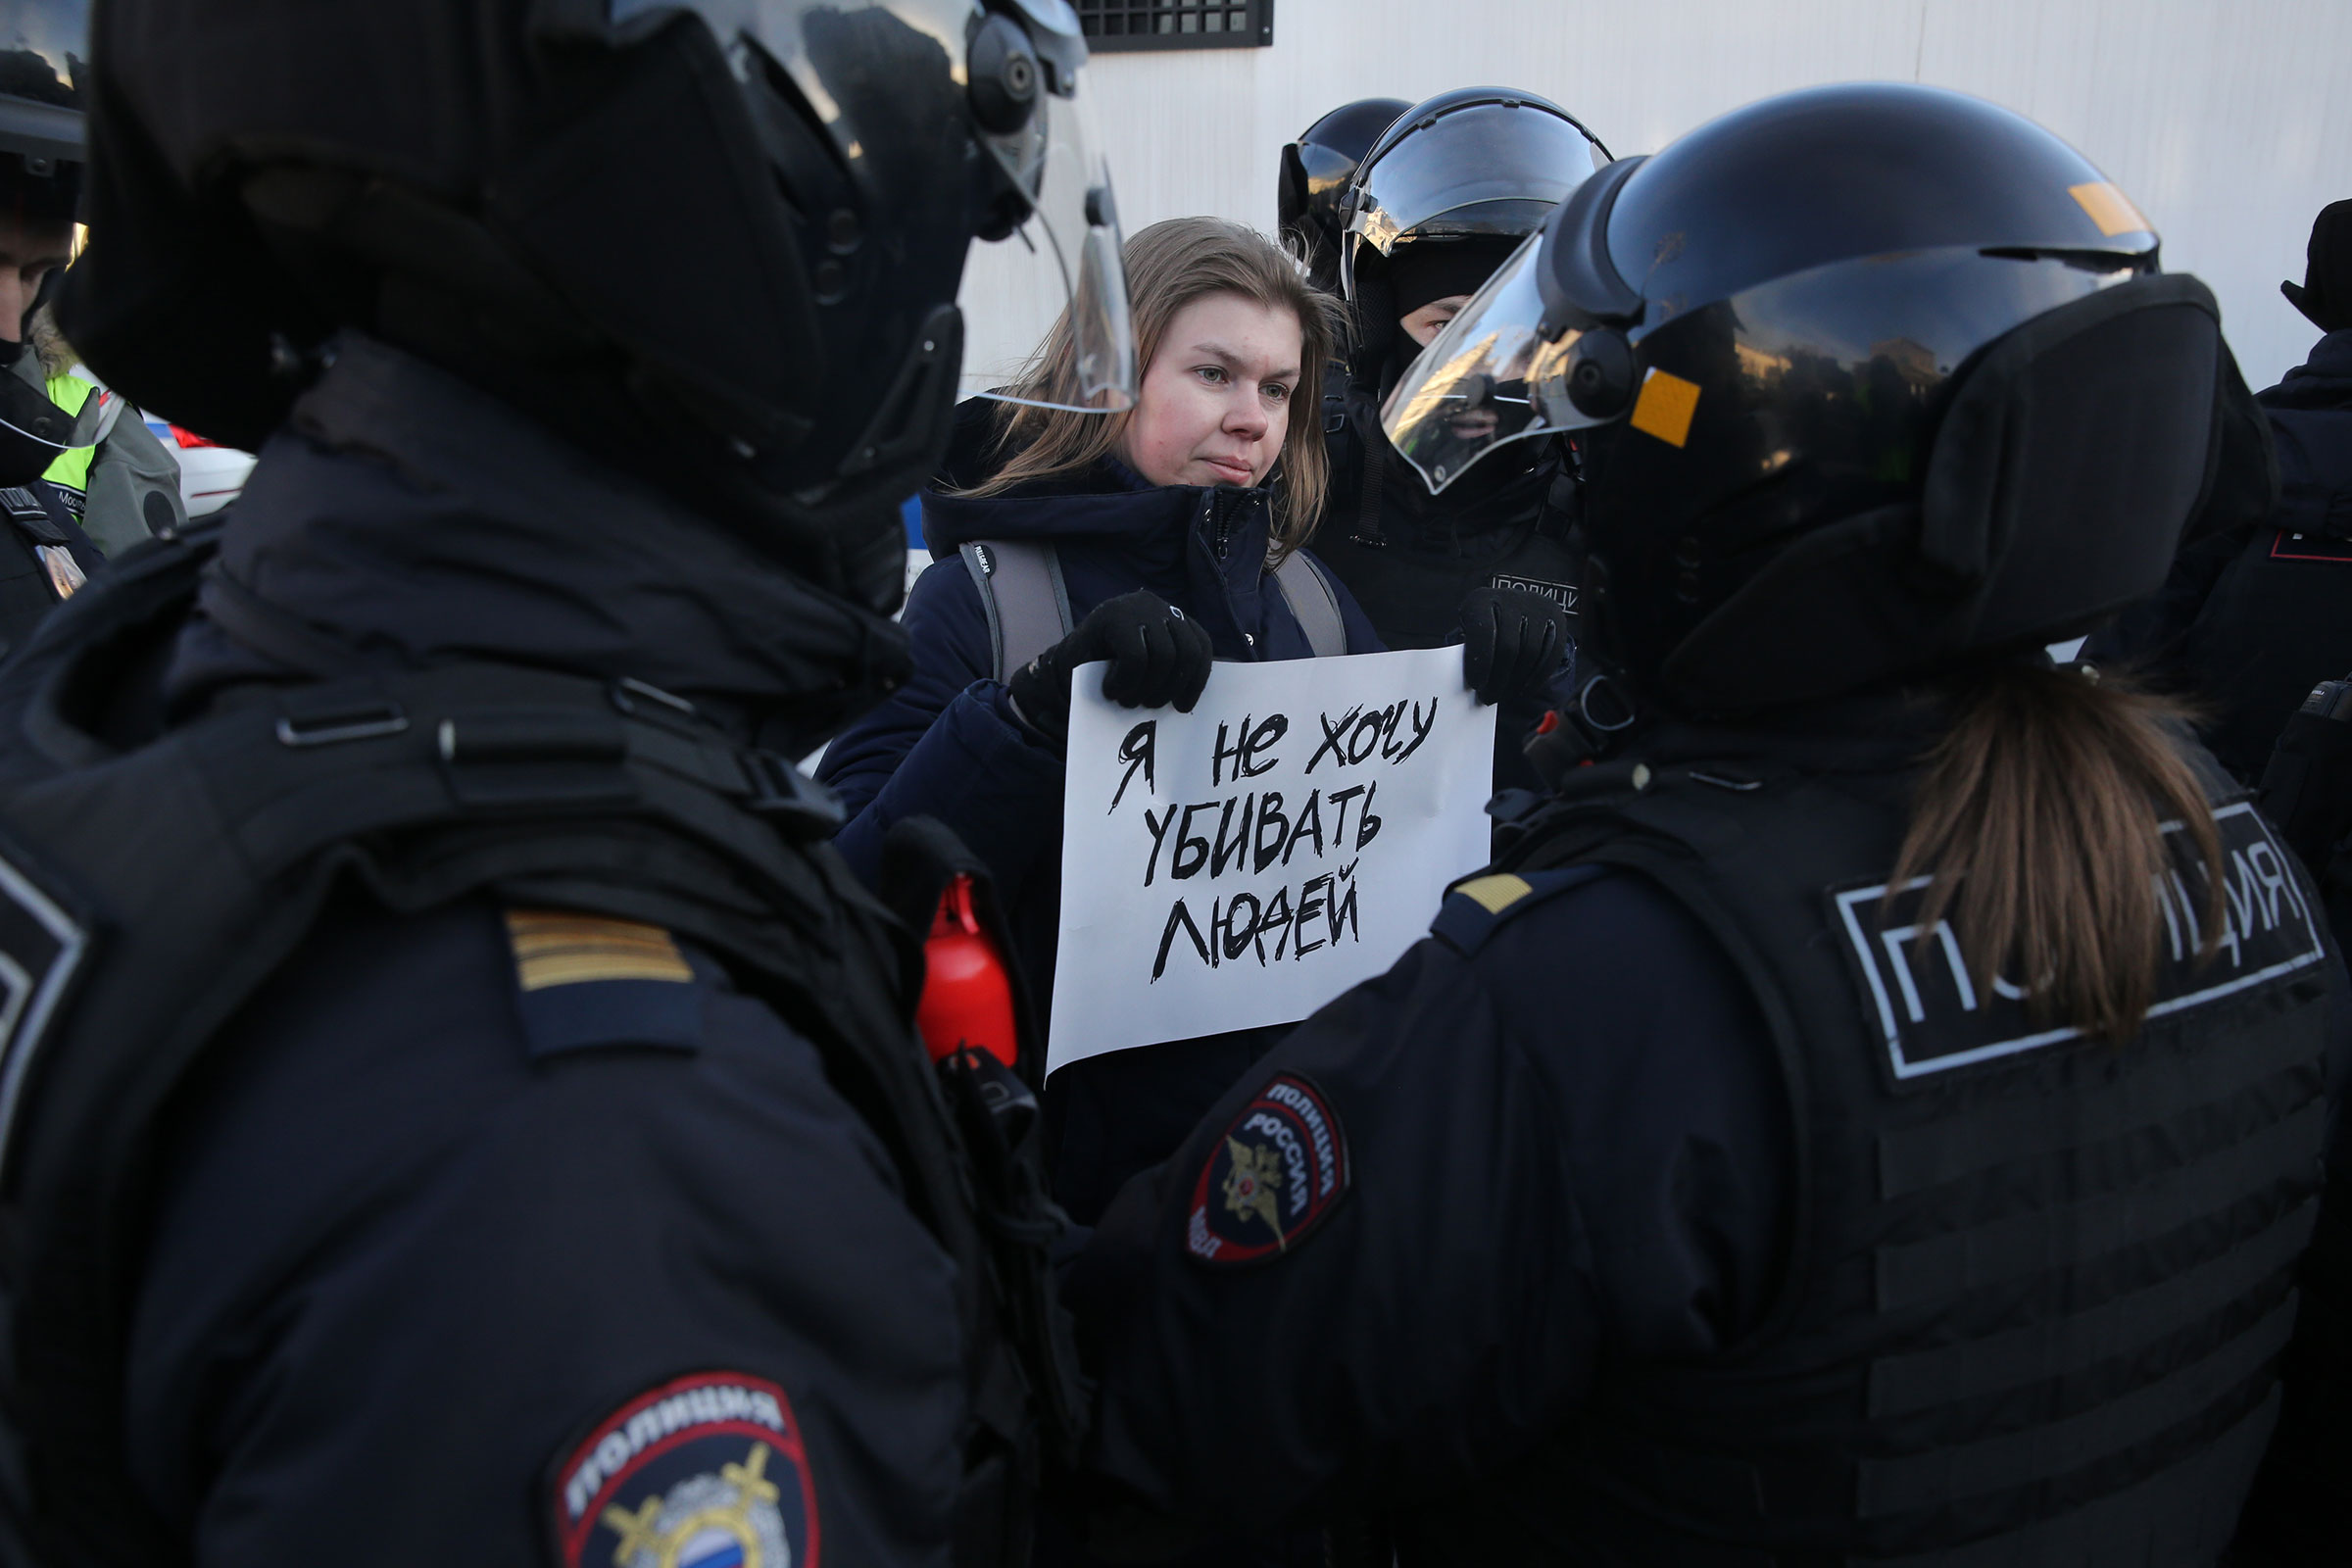 Russian Police officers detain a woman holding a poster that reads: "I do not want to kill anyone" during an unsanctioned protest rally against the military invasion on Ukraine, in Central Moscow, Russia on March,6,2022. (Konstantin Zavrazhin—Getty Images)